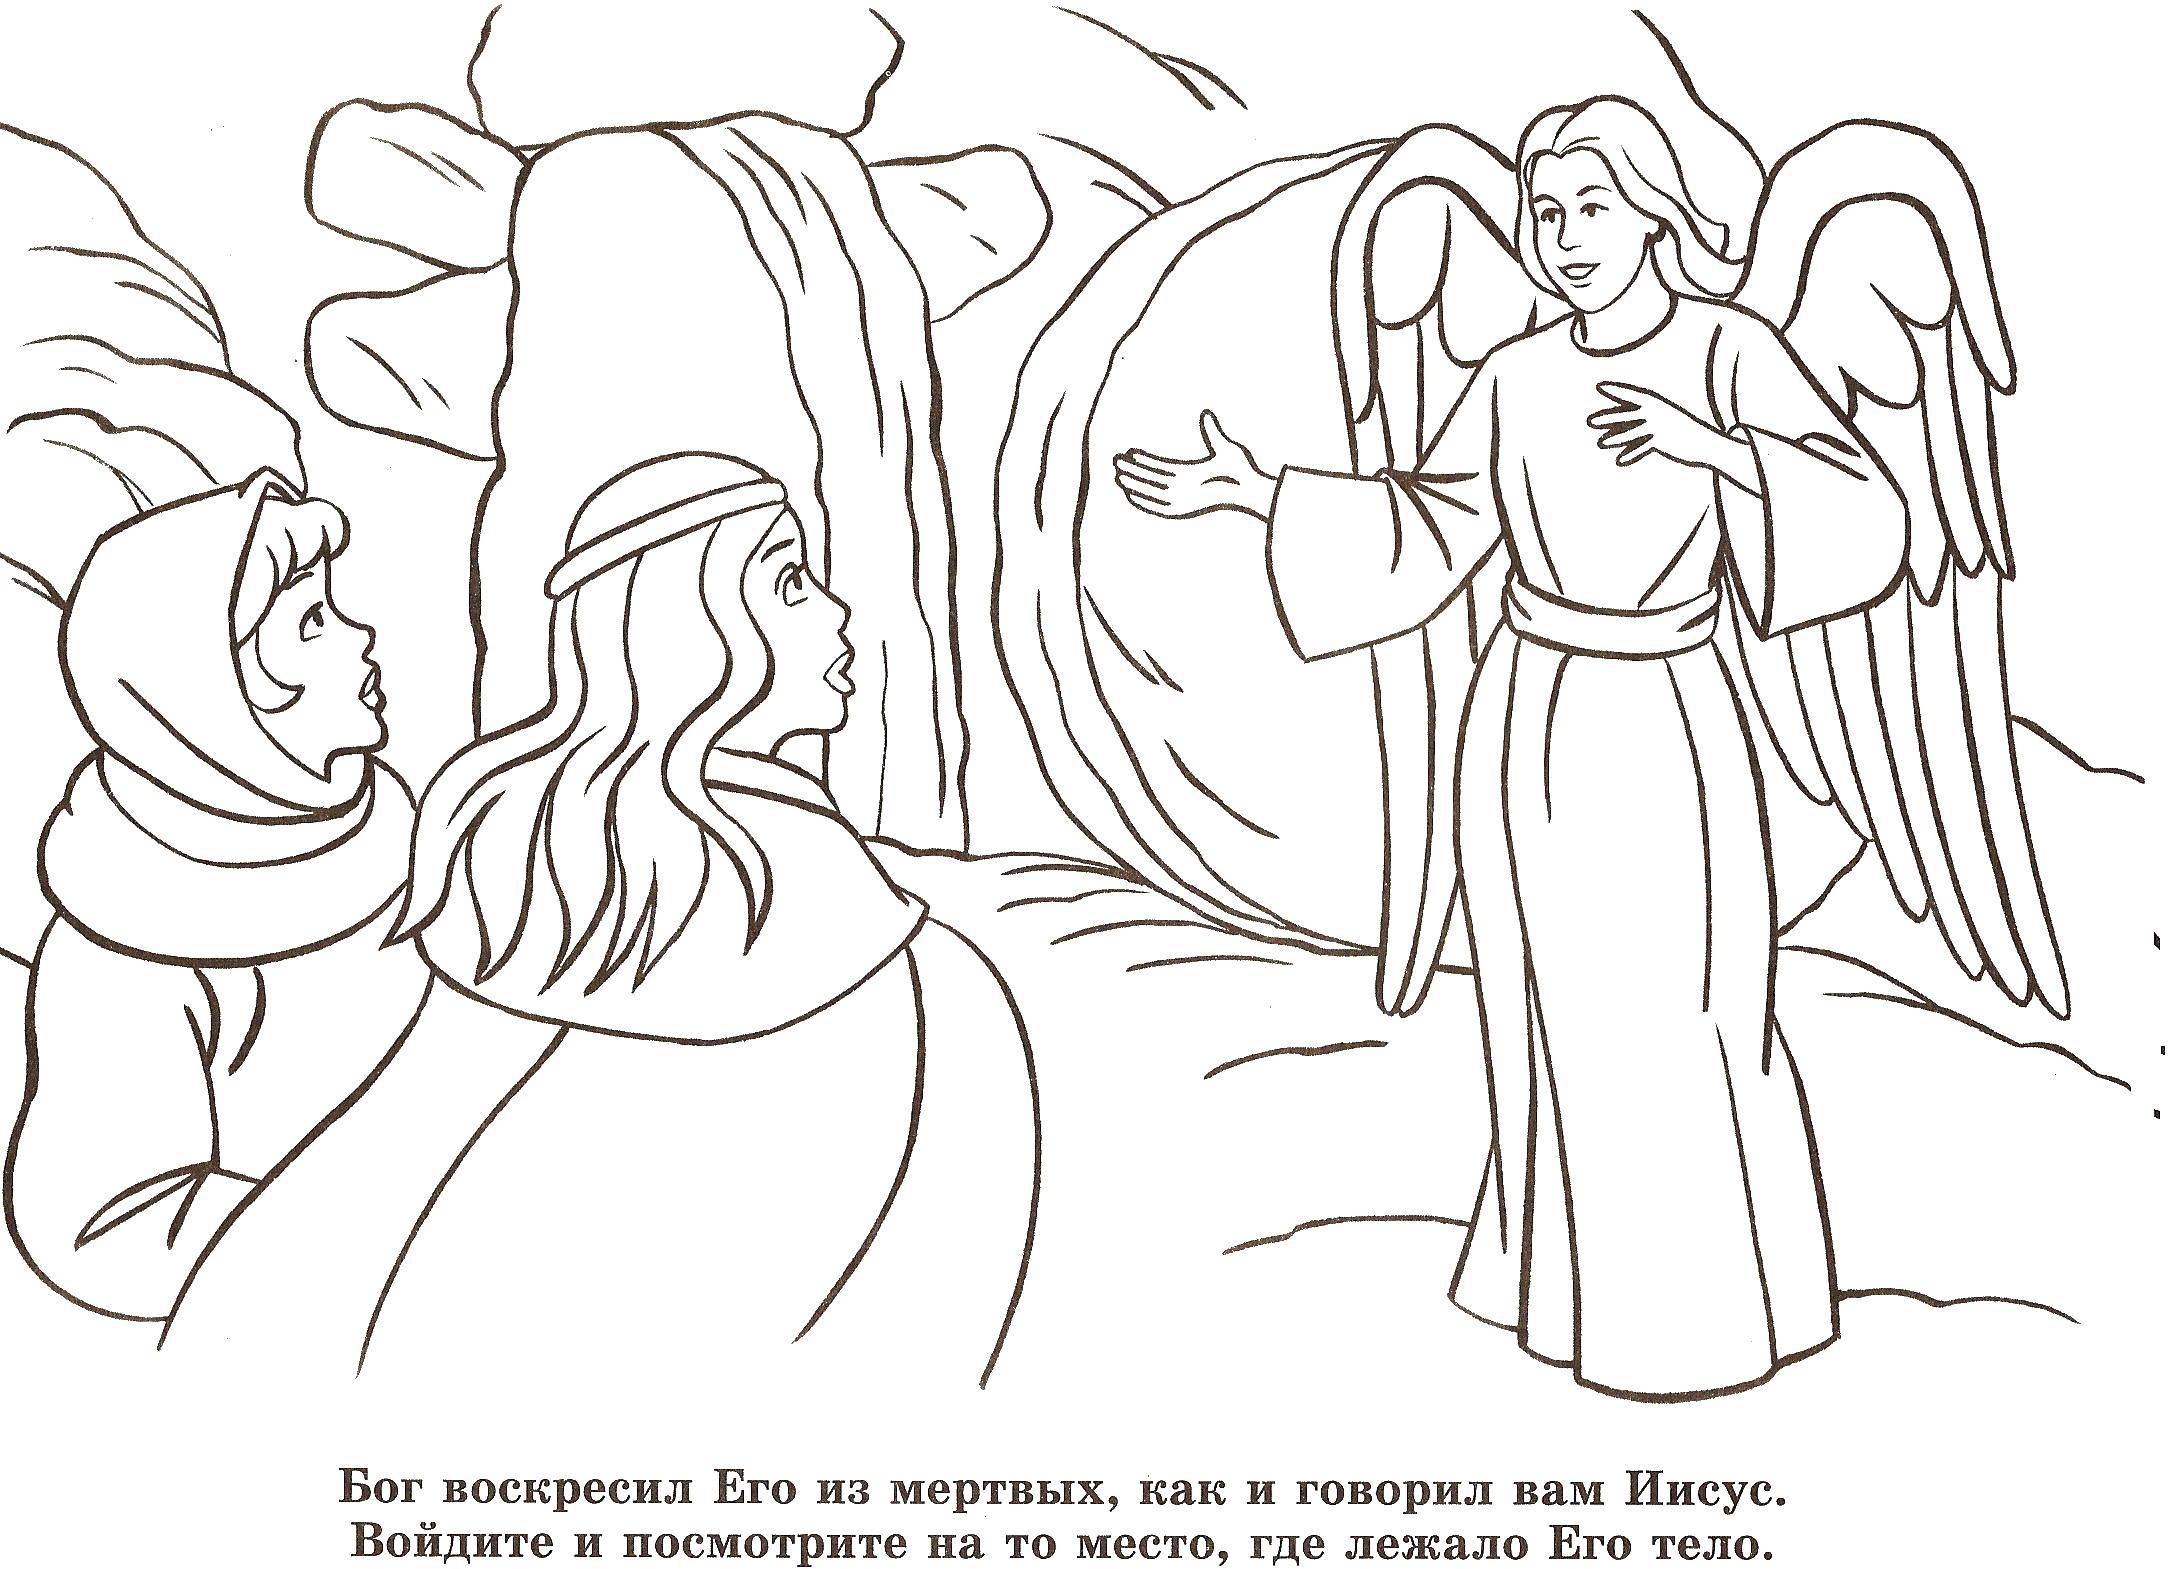 Coloring Bible stories. Category Christ is risen. Tags:  The Bible.